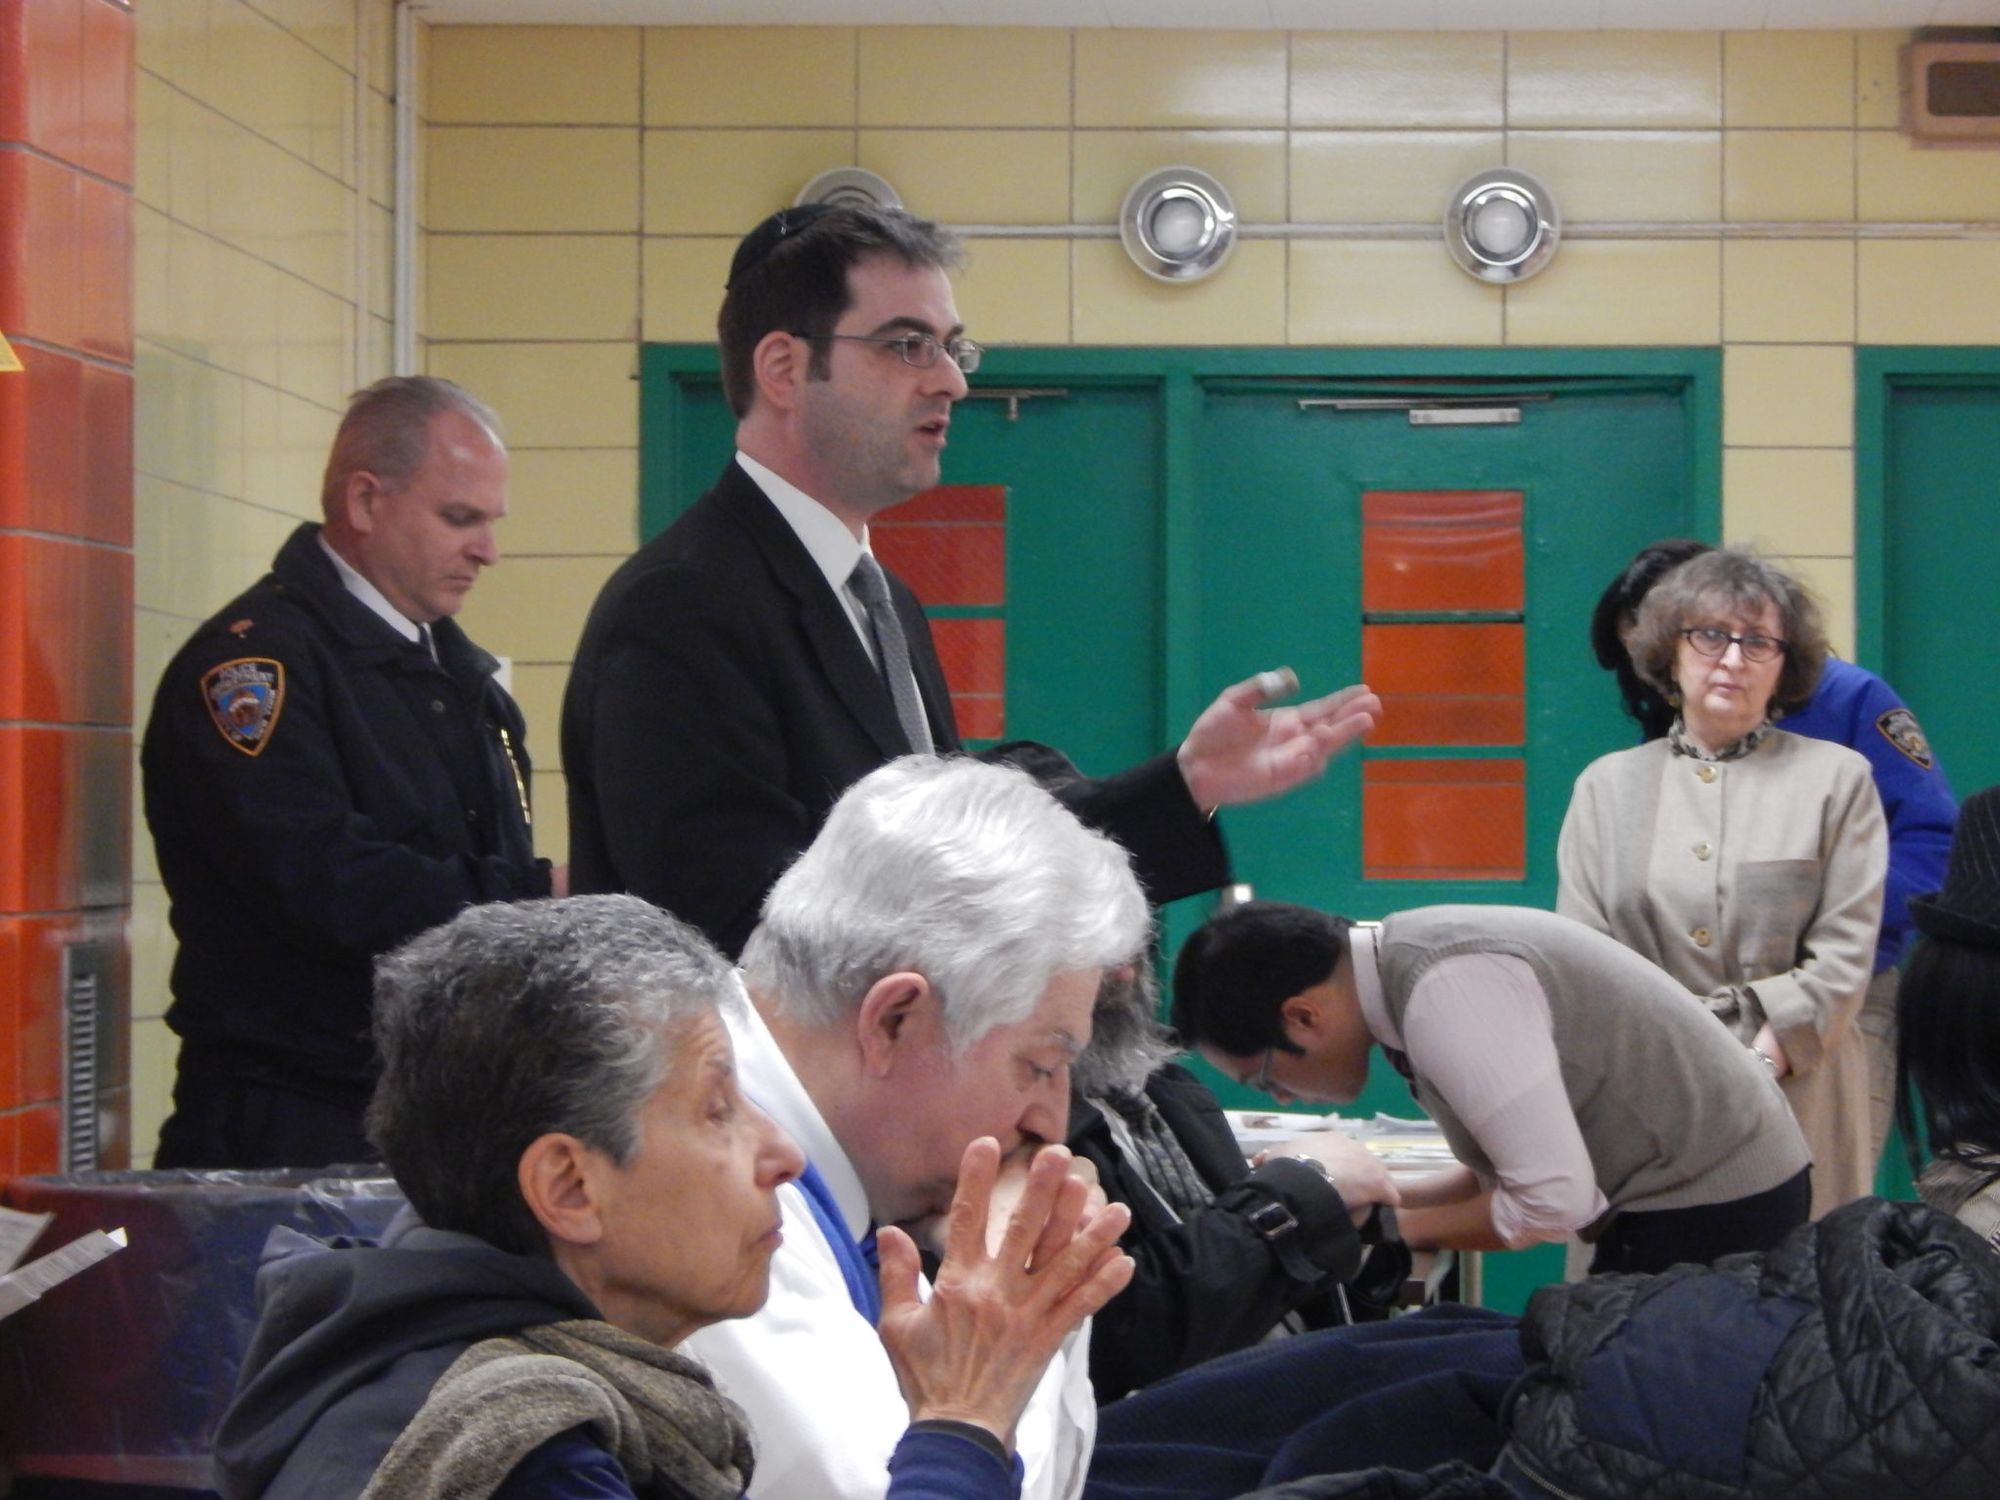 Controversy Over A Potential School Near The 70th Precinct, Scam Warnings & More Notes From Last Night’s Community Board 14 Meeting